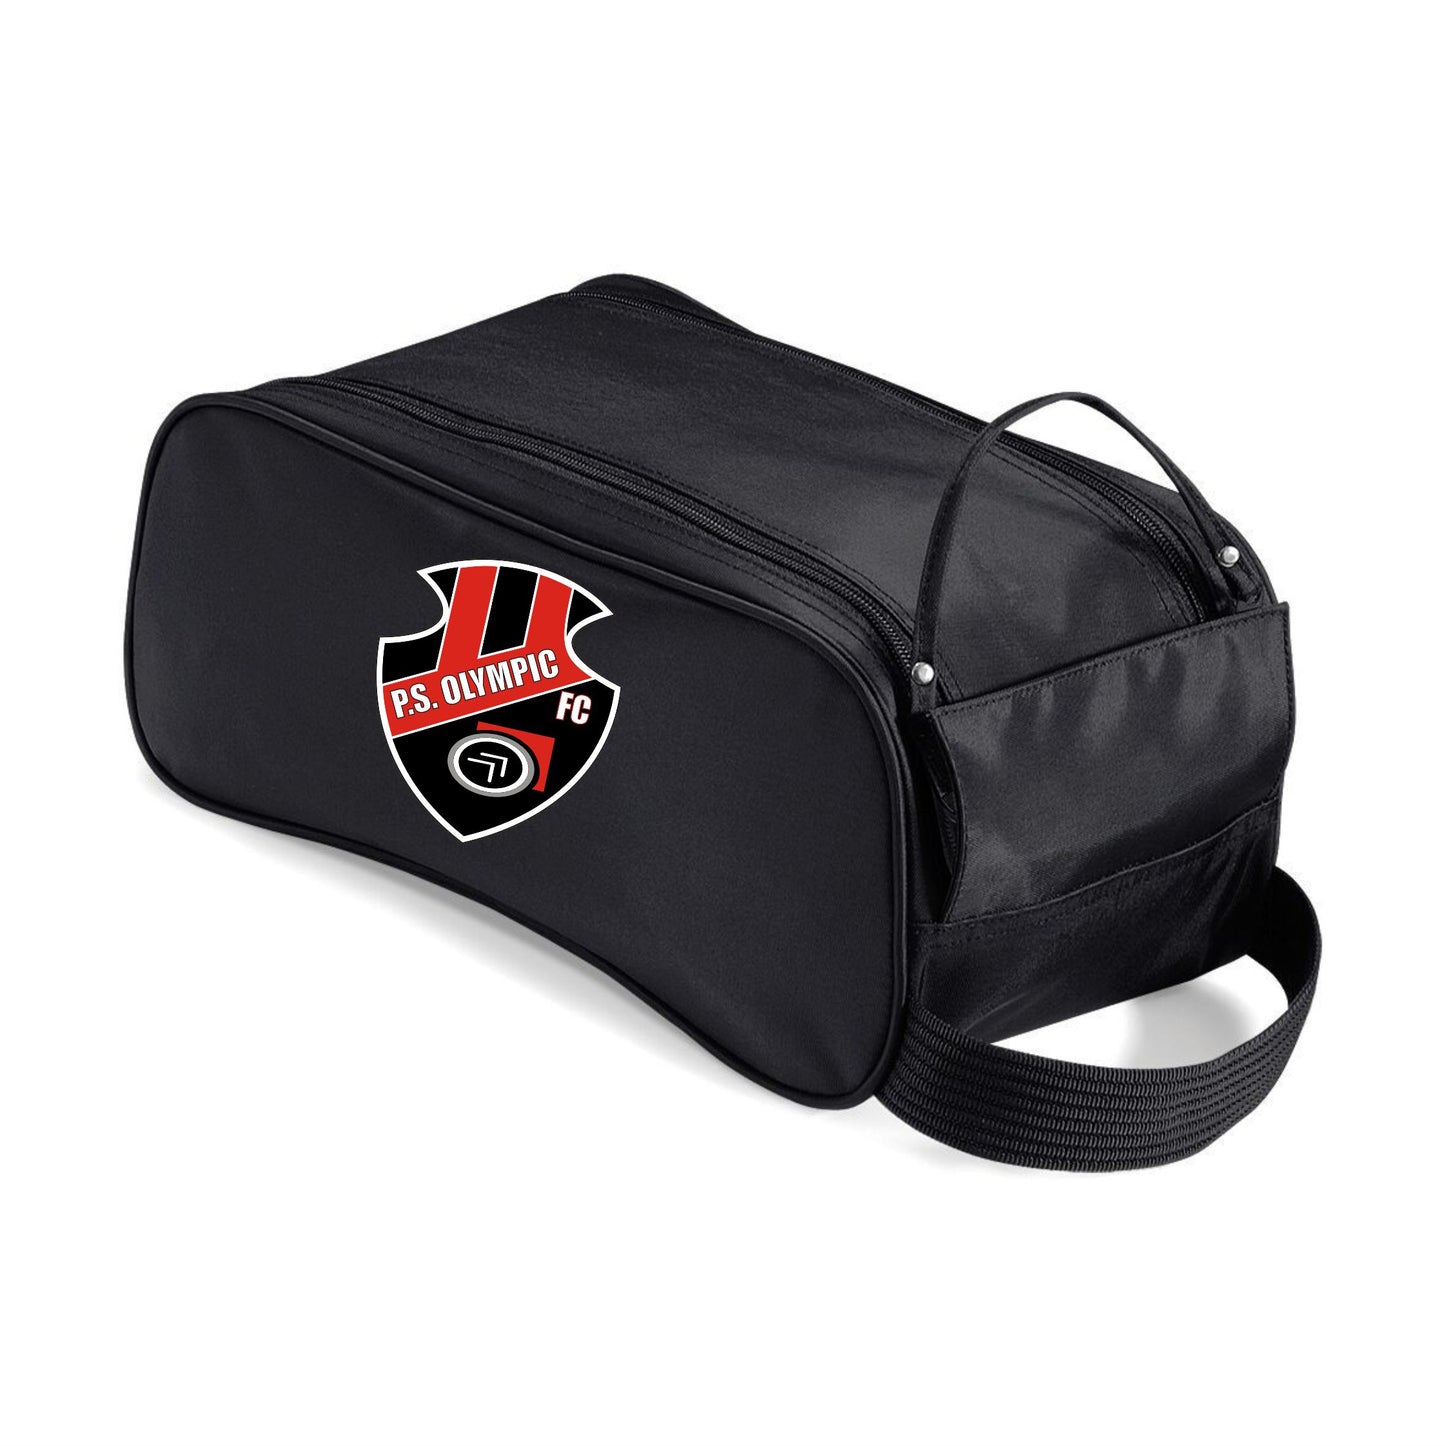 PS Olympic Boot Bag (Black)